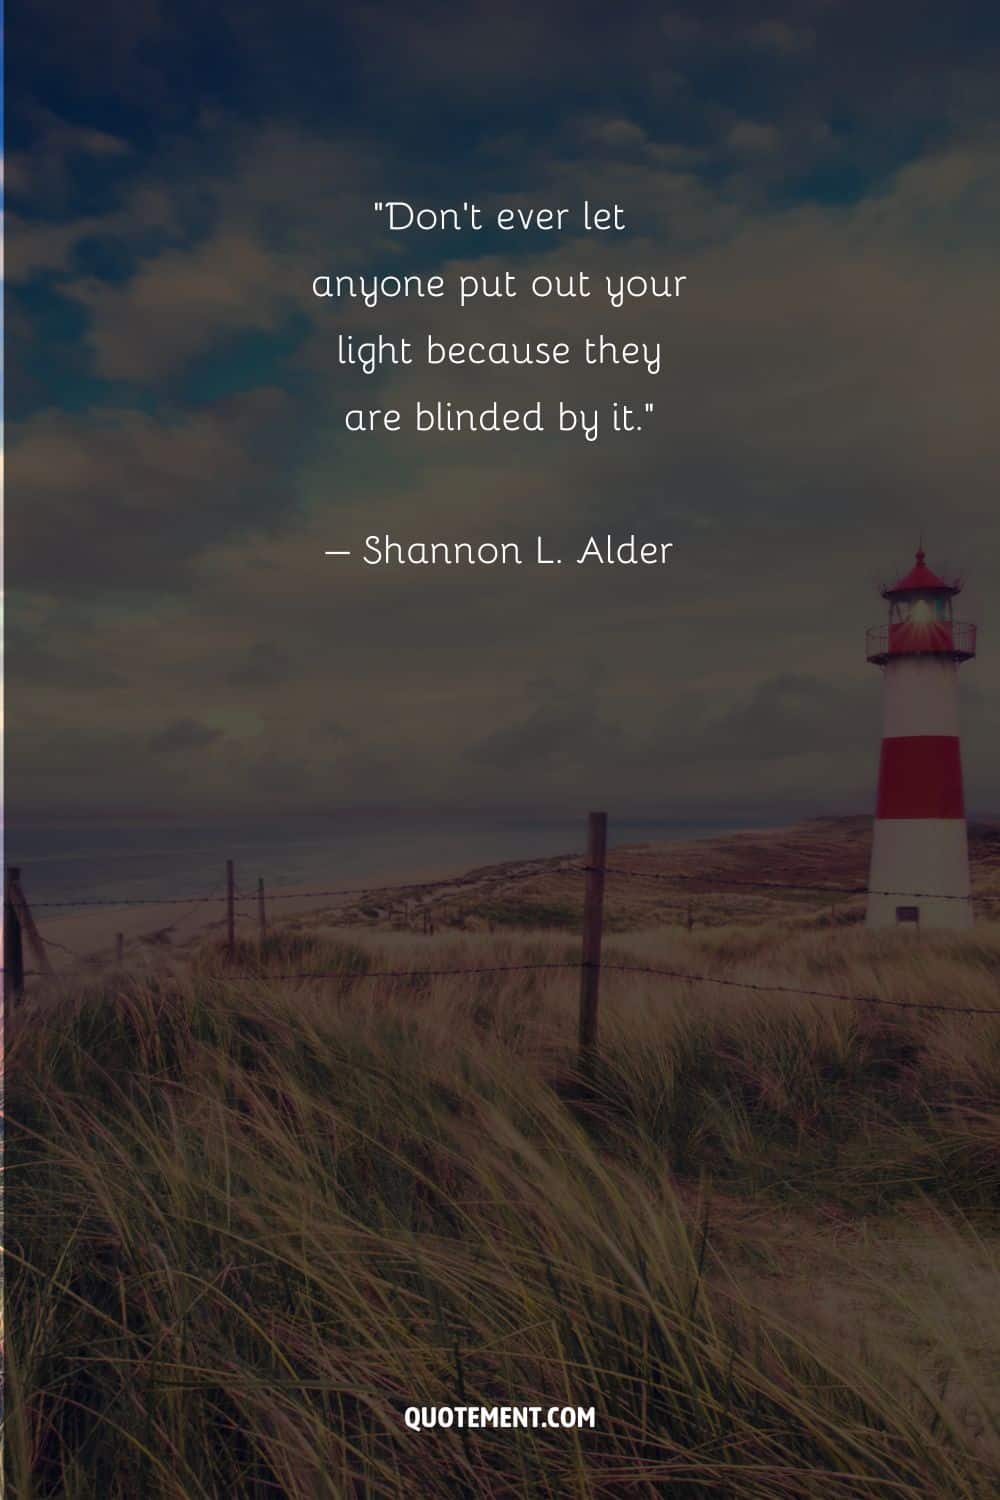 Motivational and encouraging quote by Shannon L. Alder and a lighthouse in the background